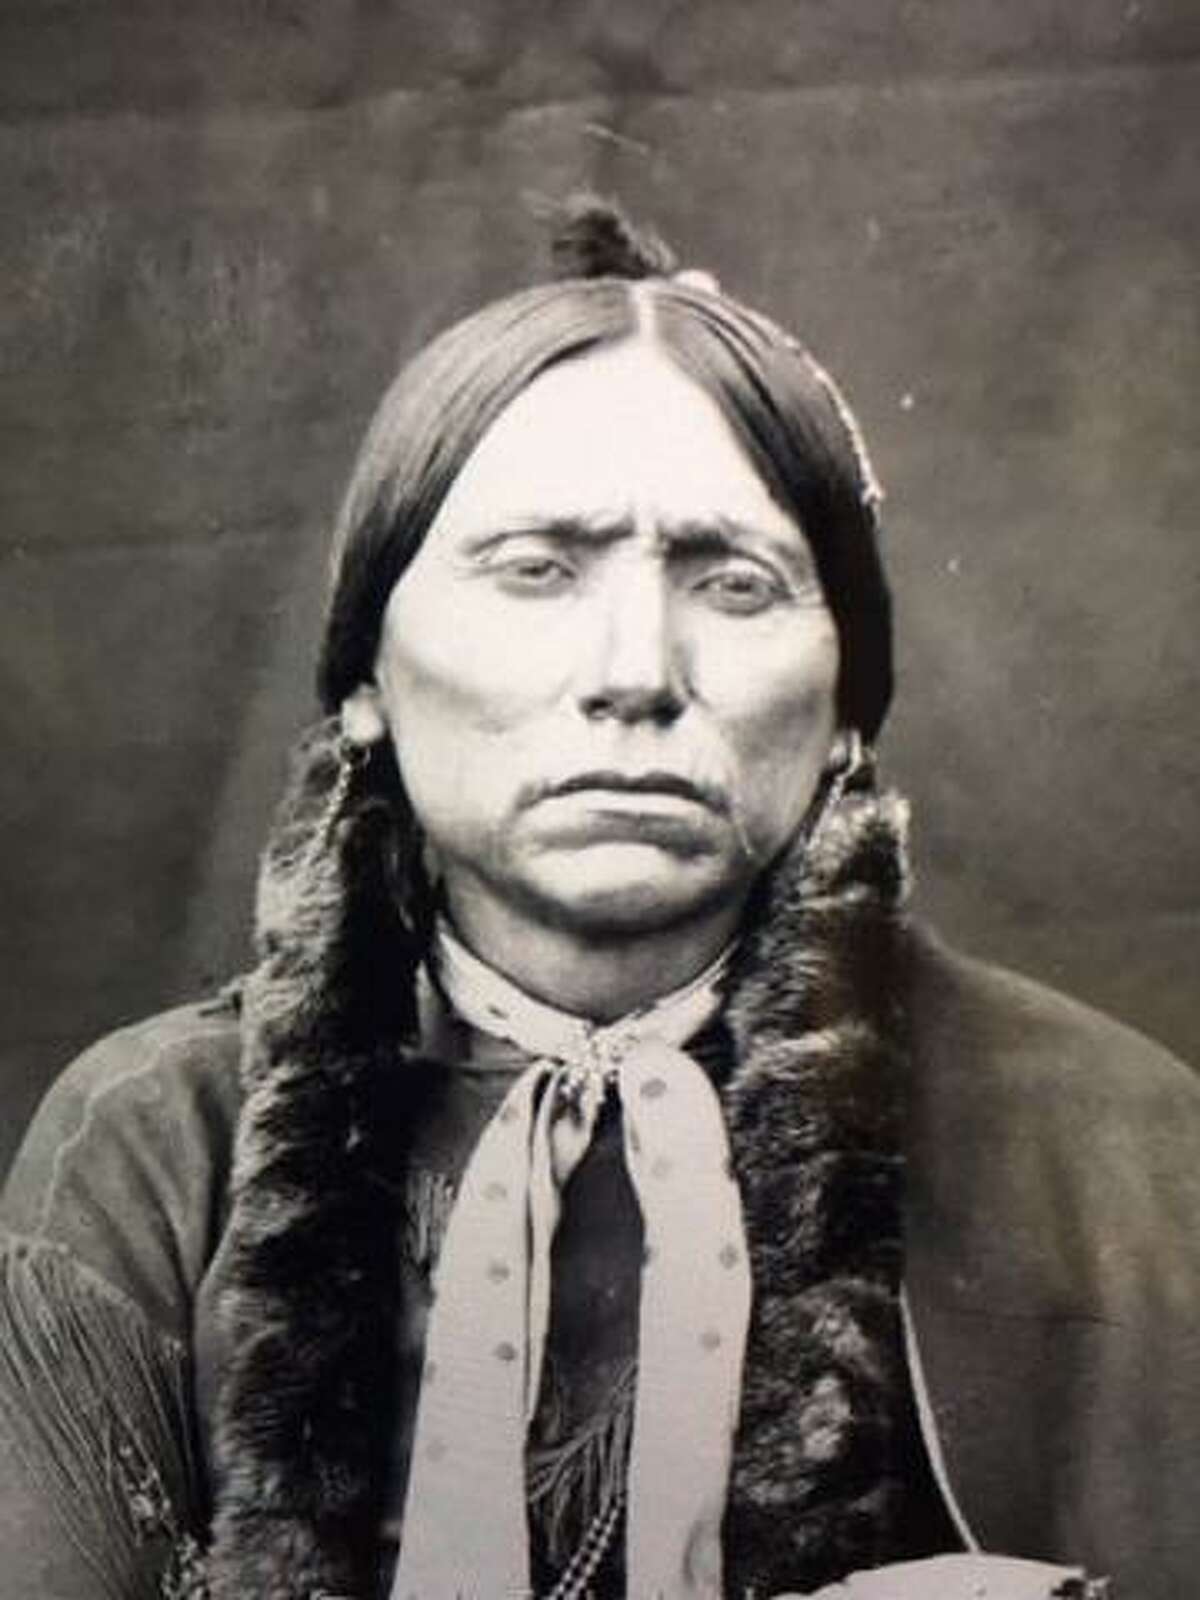 Quanah Parker is considered to be the last chief of the Comanches. He was the oldest child of Chief Peta Nacona and Cynthia Ann Parker. Cynthia was kidnapped at the age of 9 by a band of Comanche in 1836 and lived for 25 years as a Comanche.